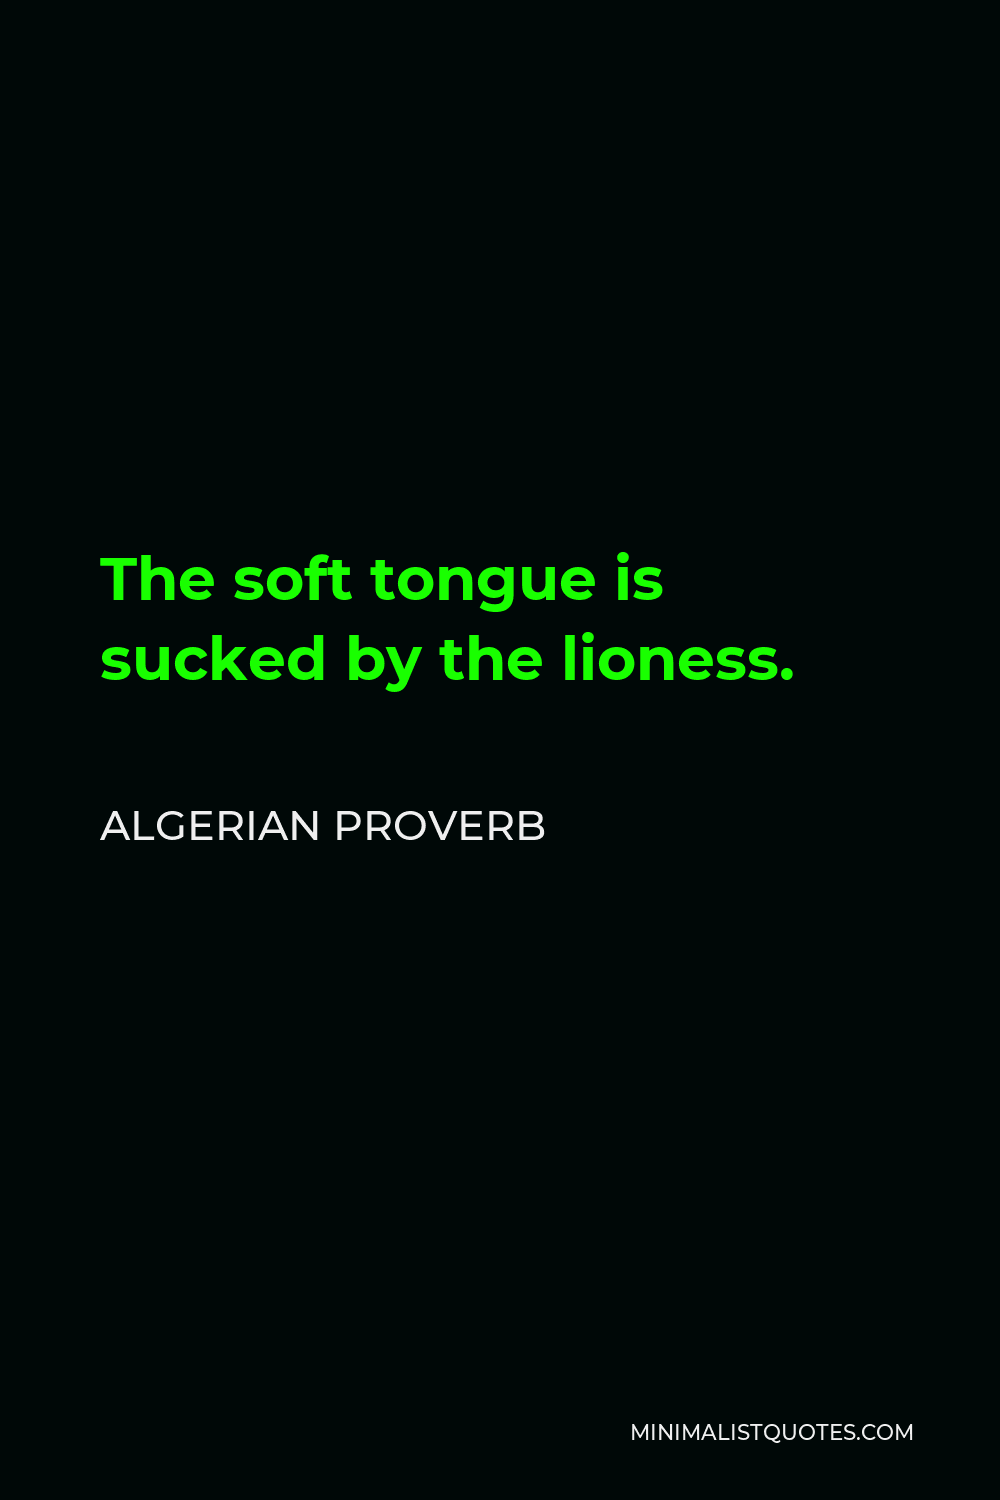 Algerian Proverb Quote - The soft tongue is sucked by the lioness.